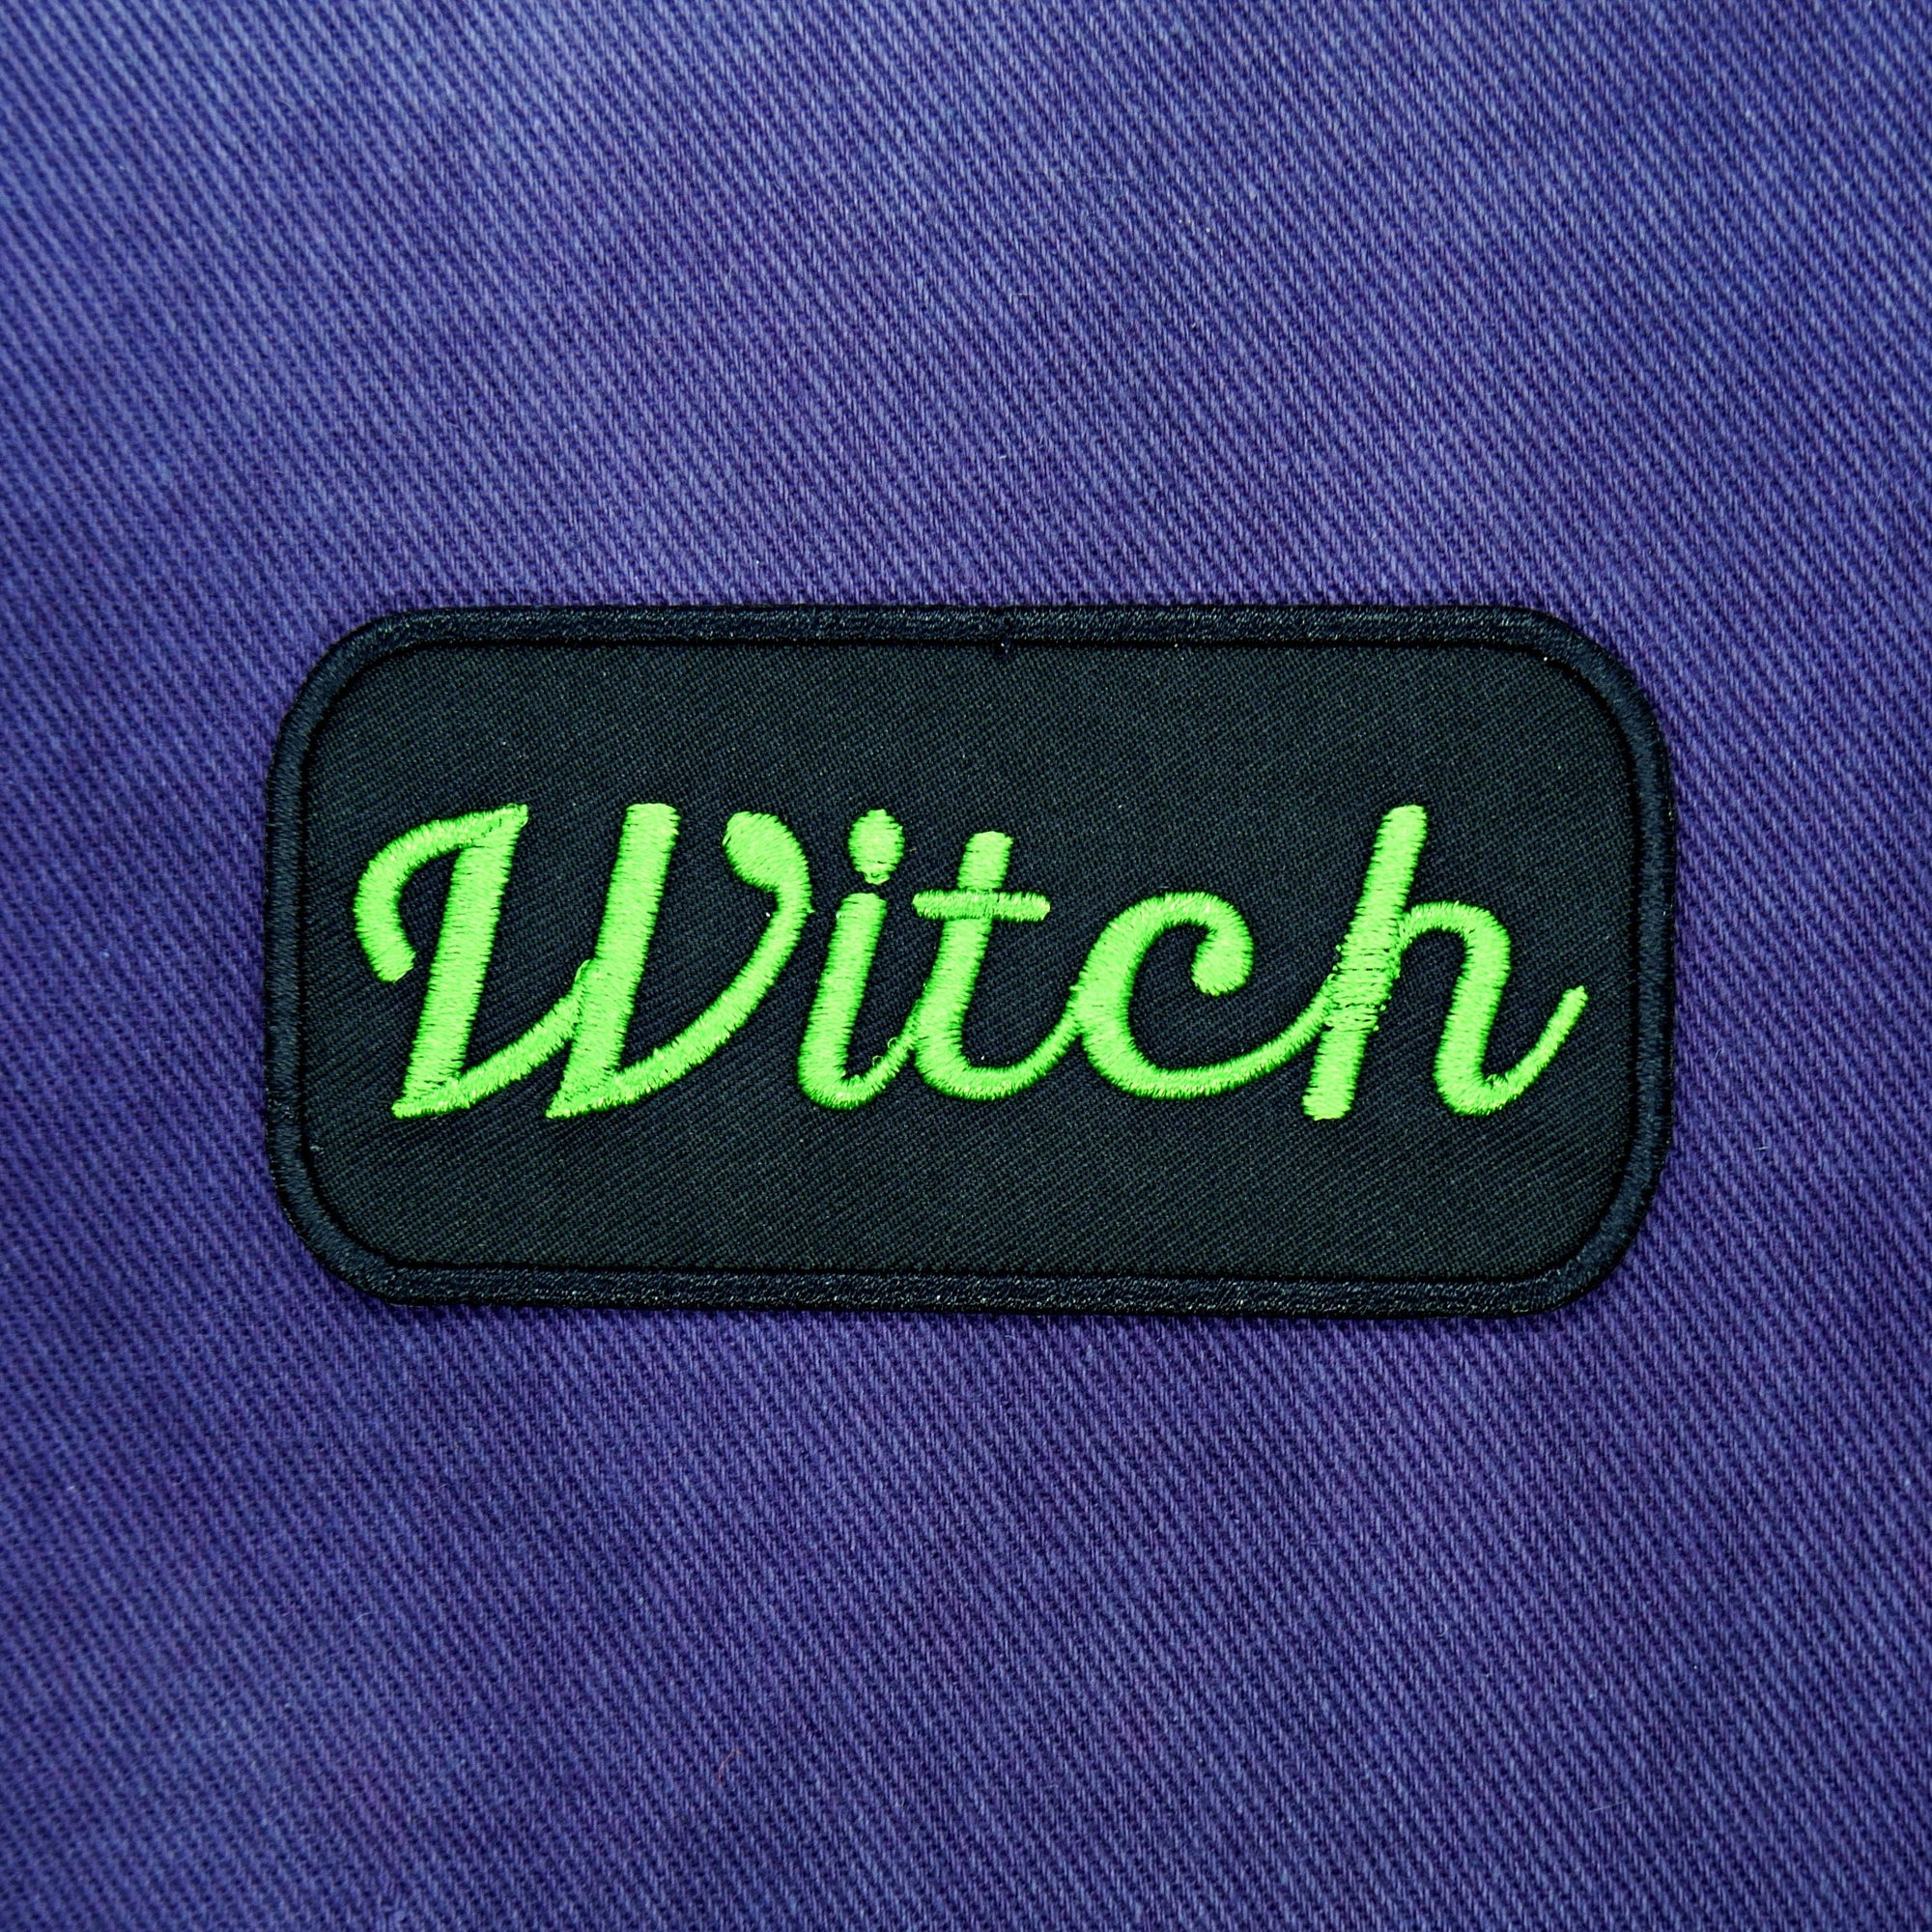 Witch Name Tag Patch